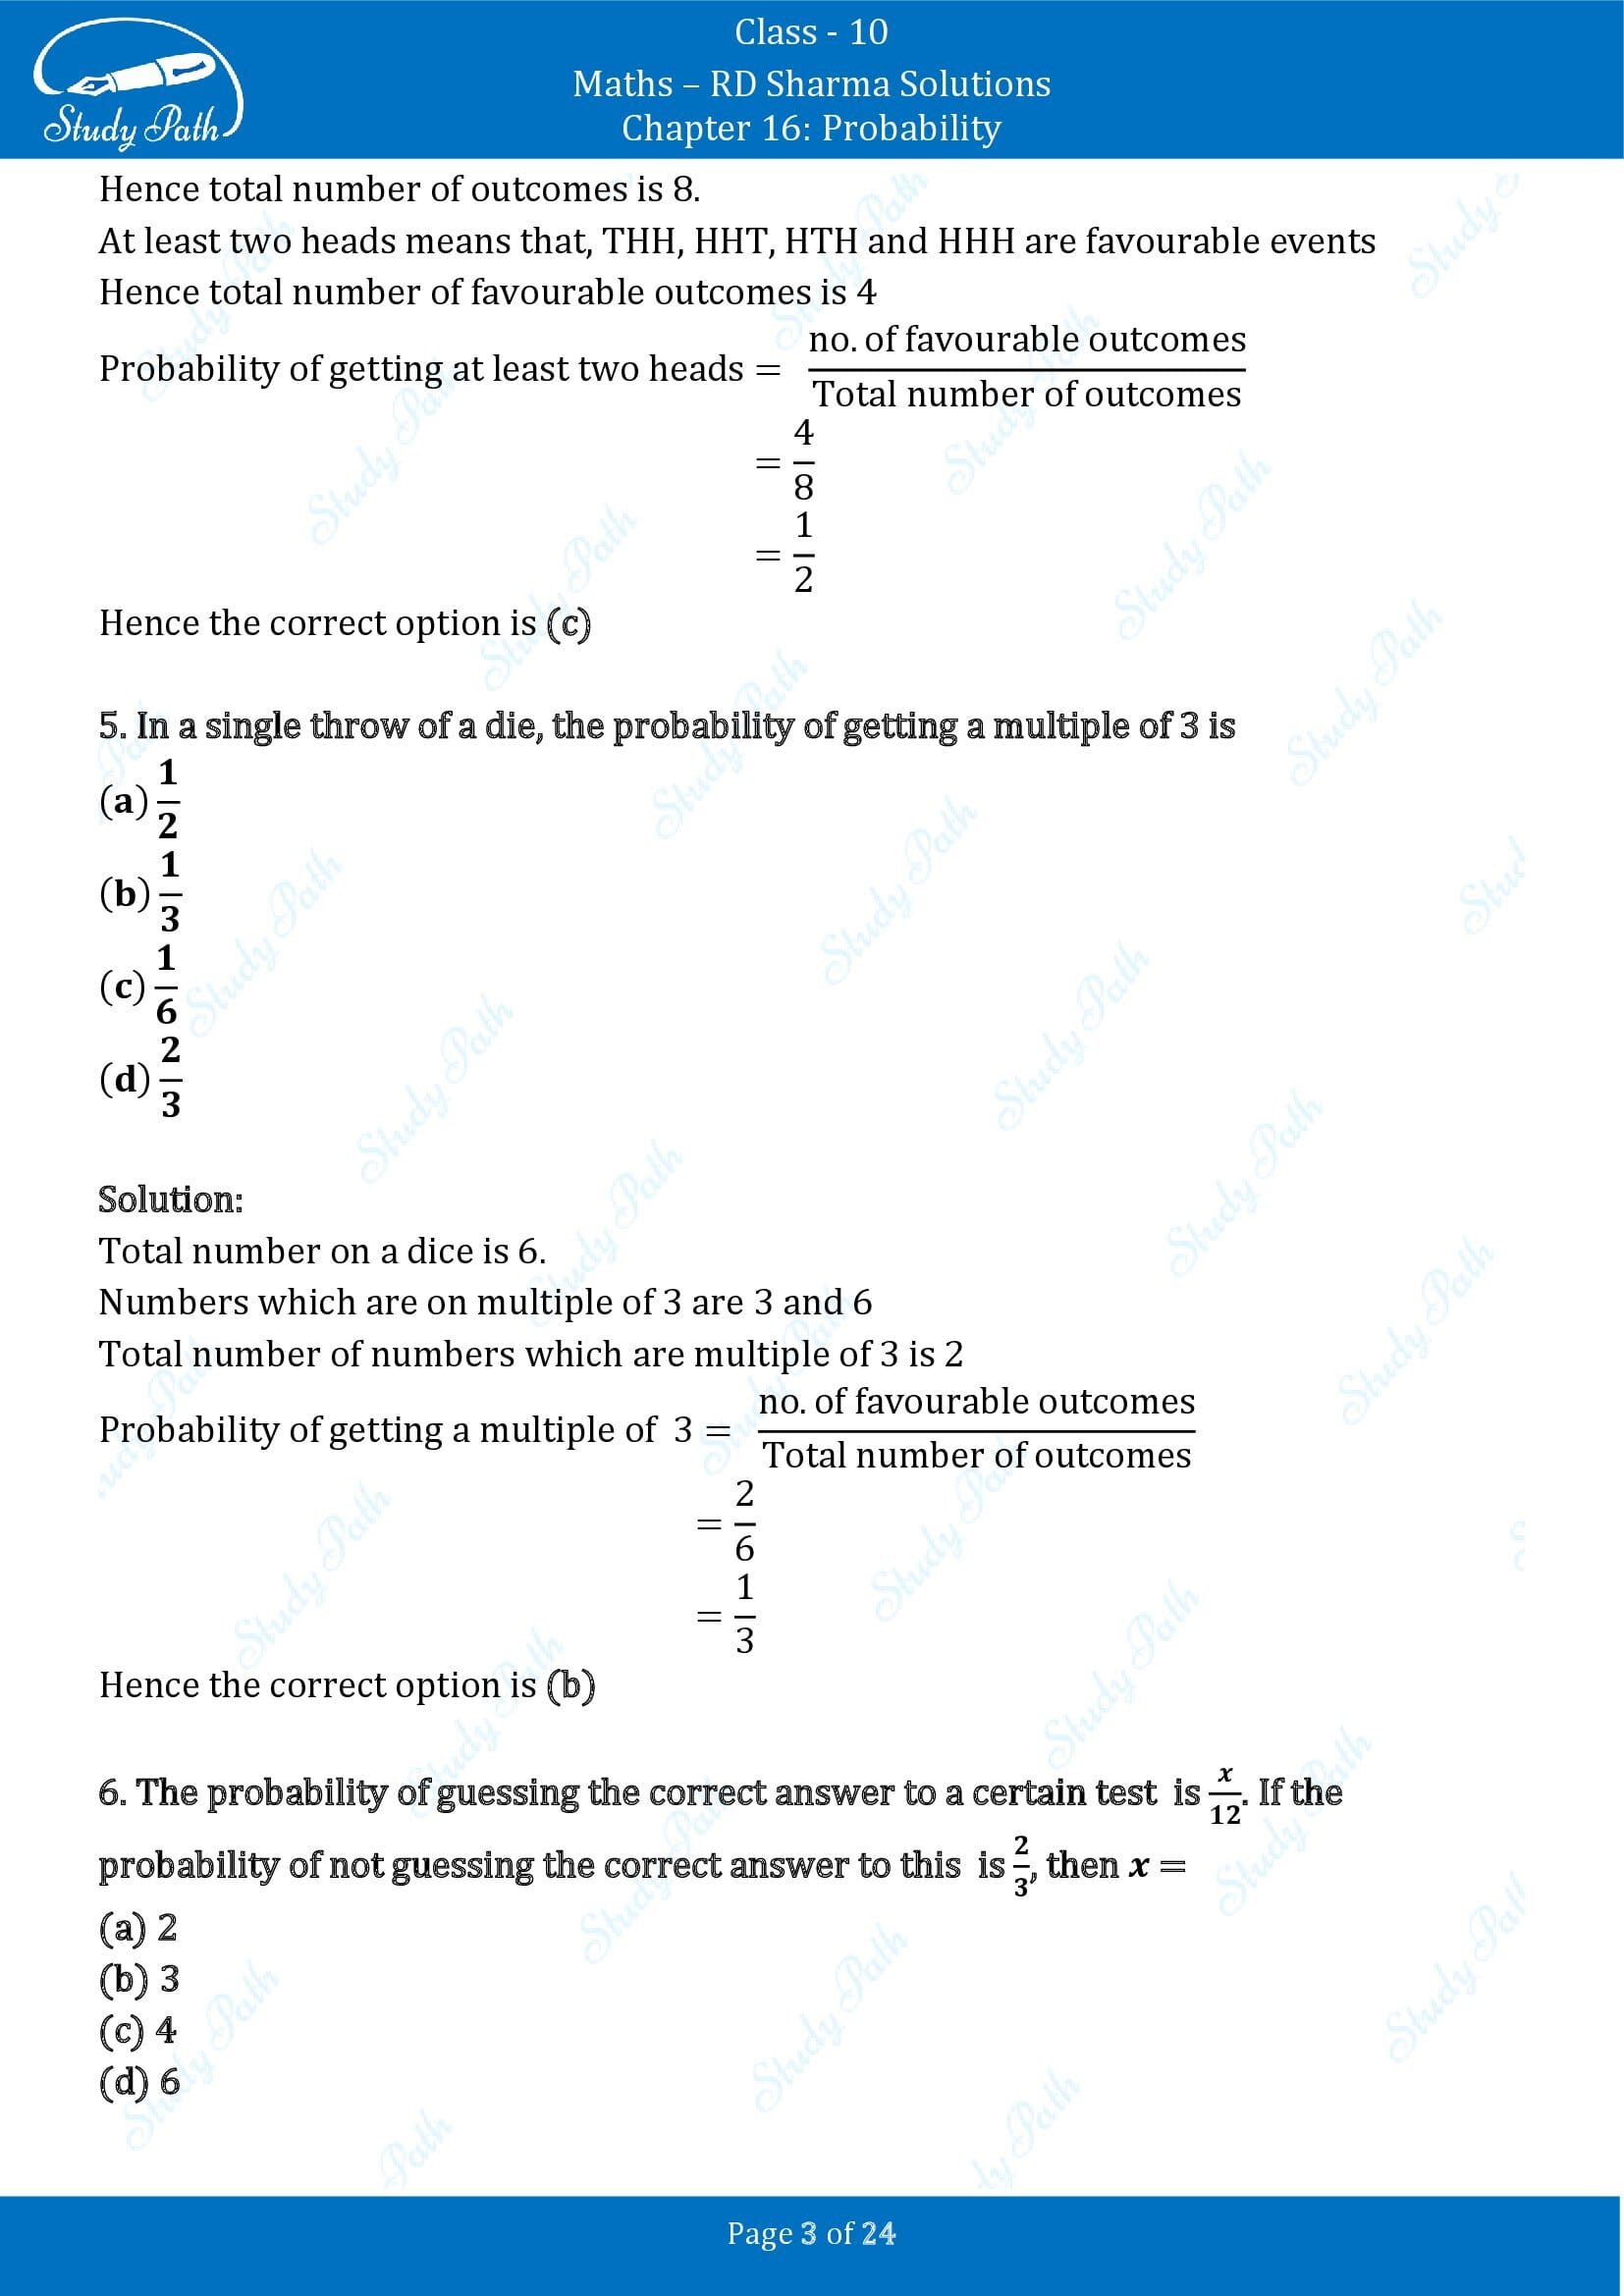 RD Sharma Solutions Class 10 Chapter 16 Probability Multiple Choice Question MCQs 00003